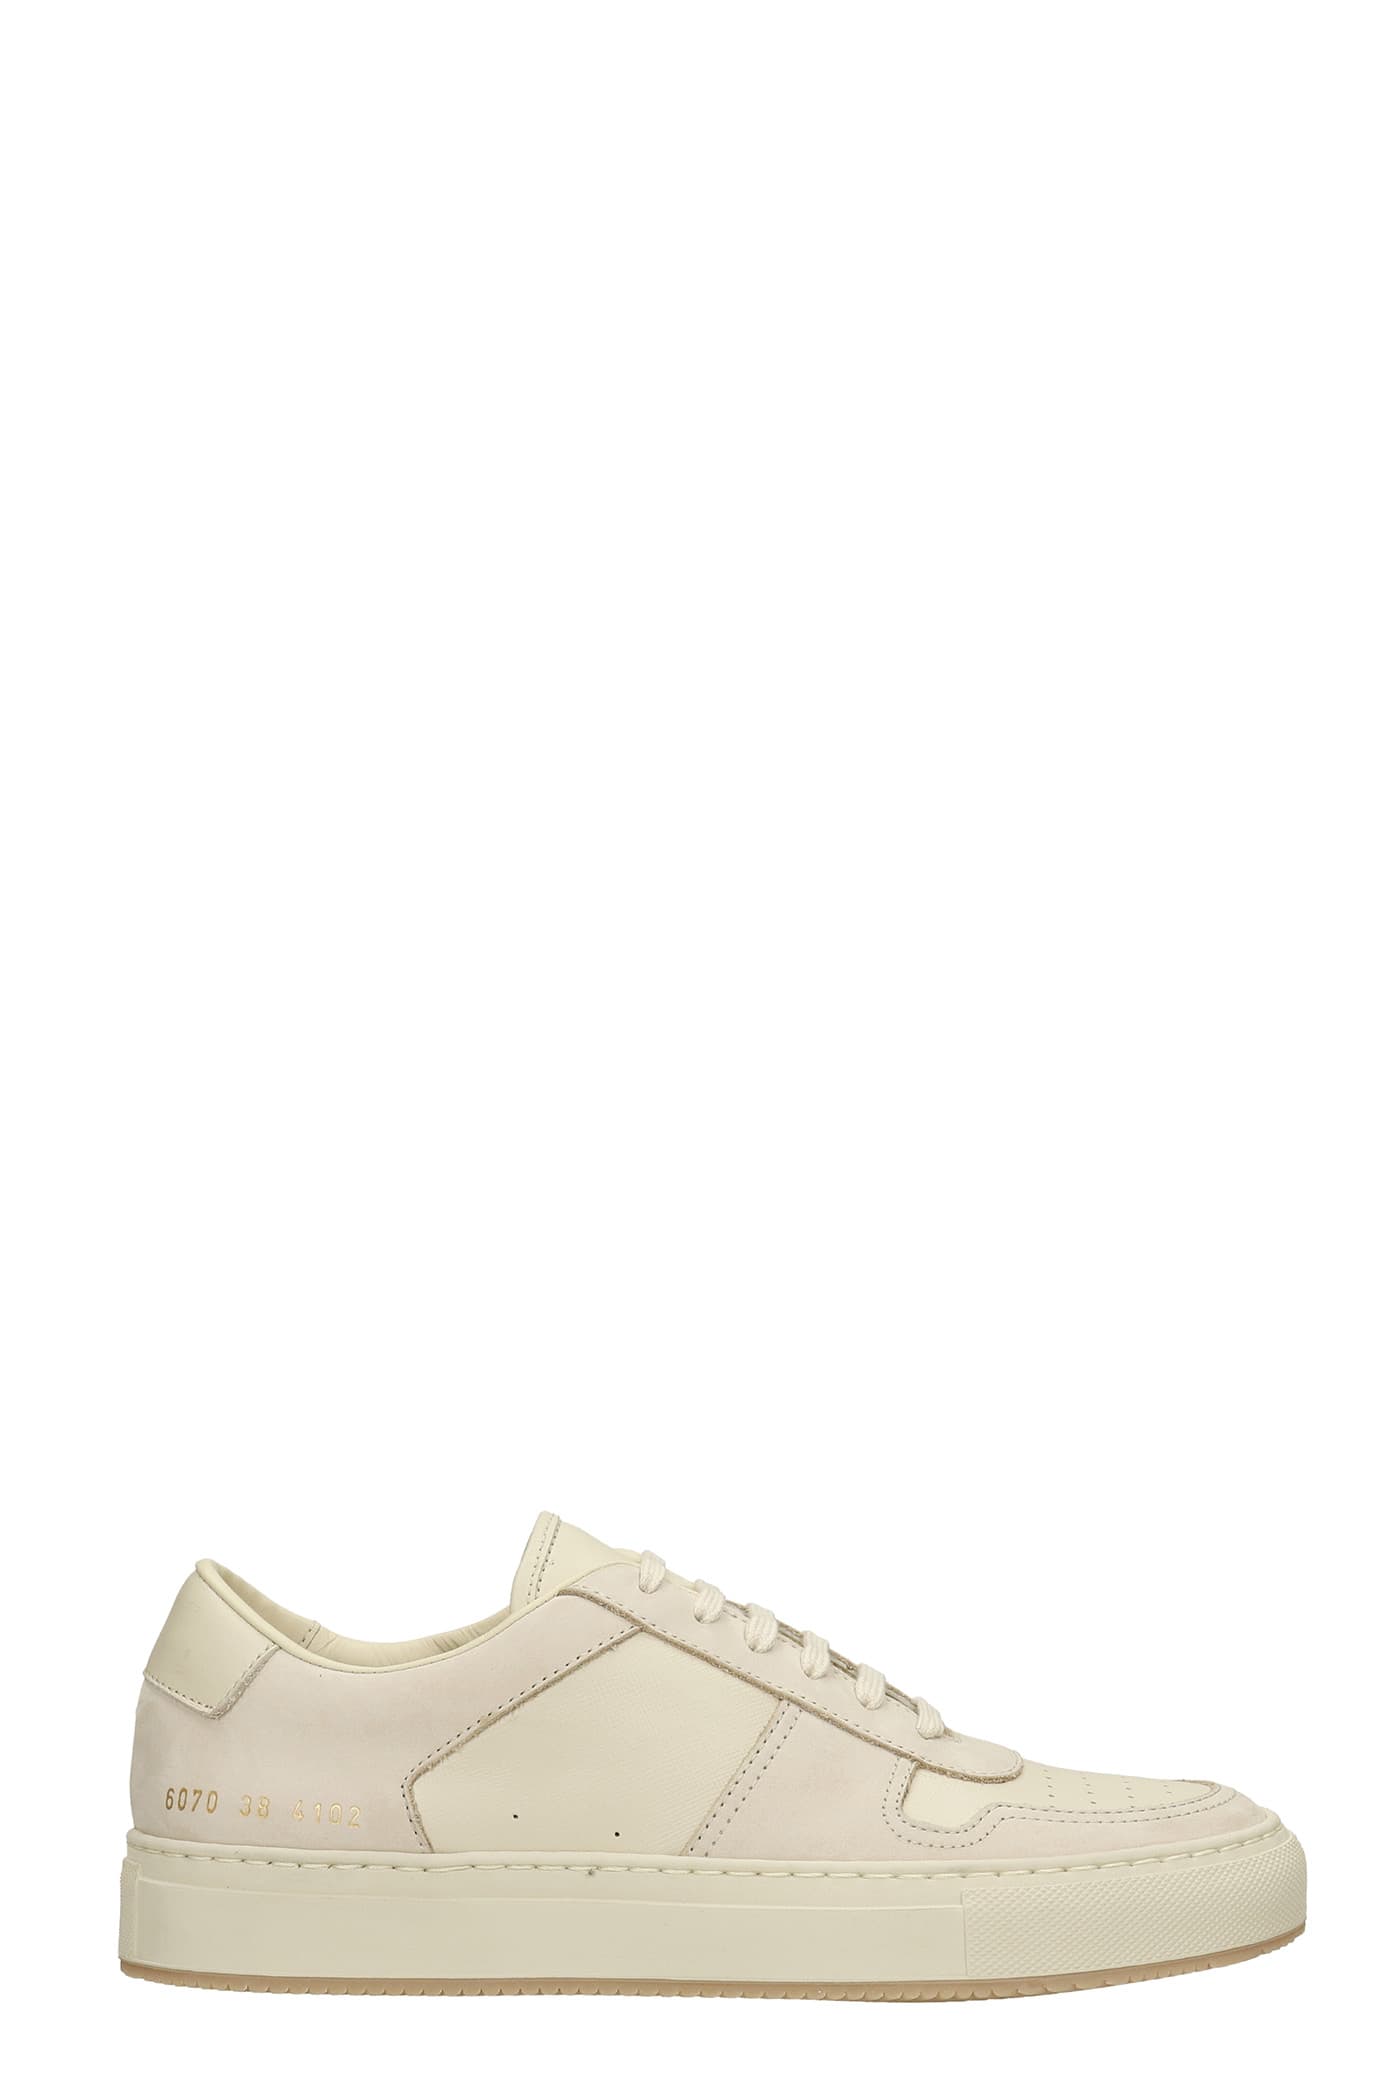 Common Projects Bball Sneakers In Beige Suede And Leather